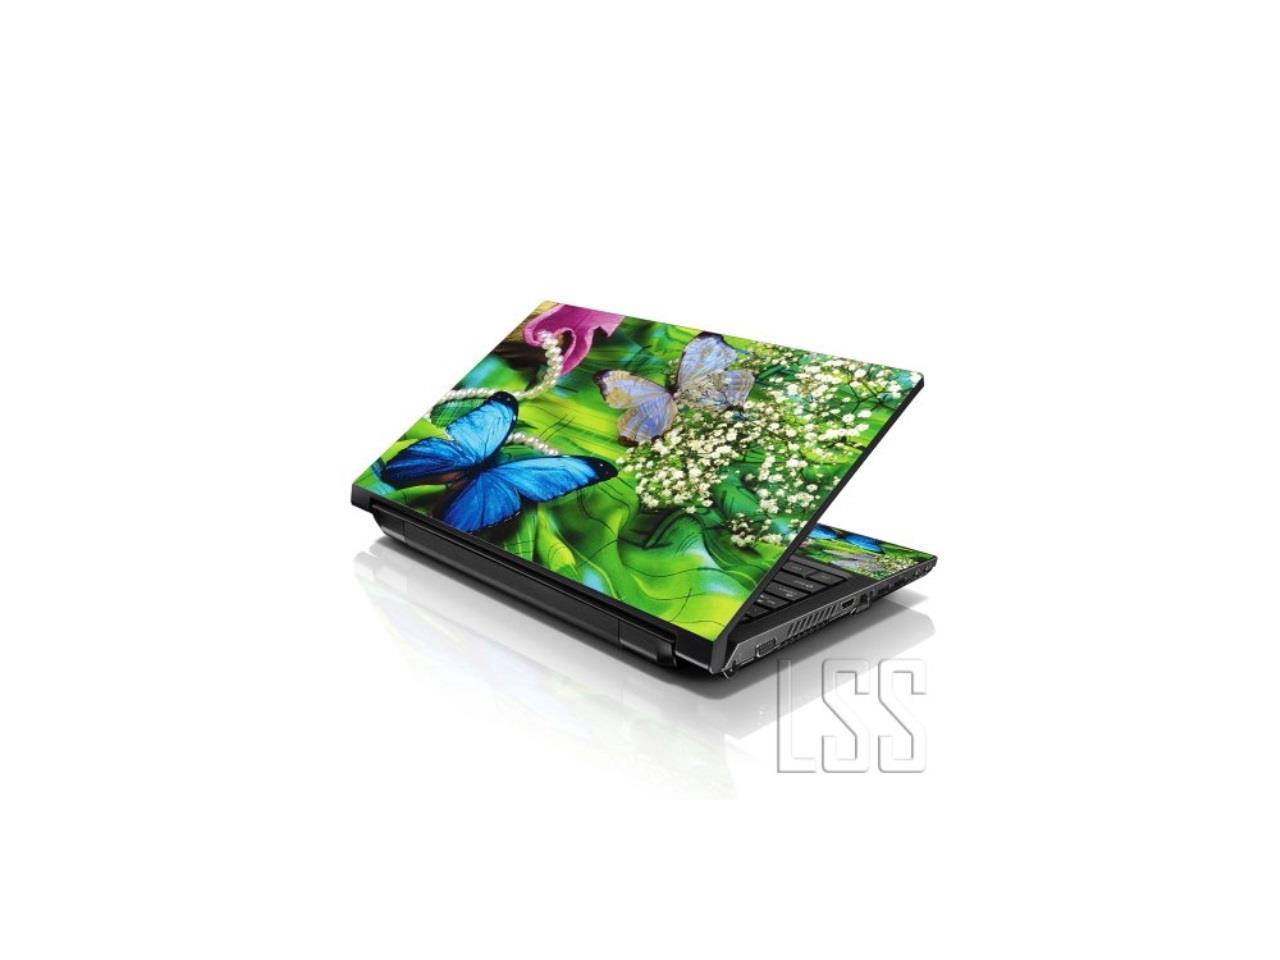 Multi Colored Floral LSS 17 17.3 inch Laptop Notebook Skin Sticker Cover Art Decal Fits 16.5 17 17.3 18.4 19 HP Dell Apple Asus Acer Lenovo Asus Compaq Free 2 Wrist Pad Included 